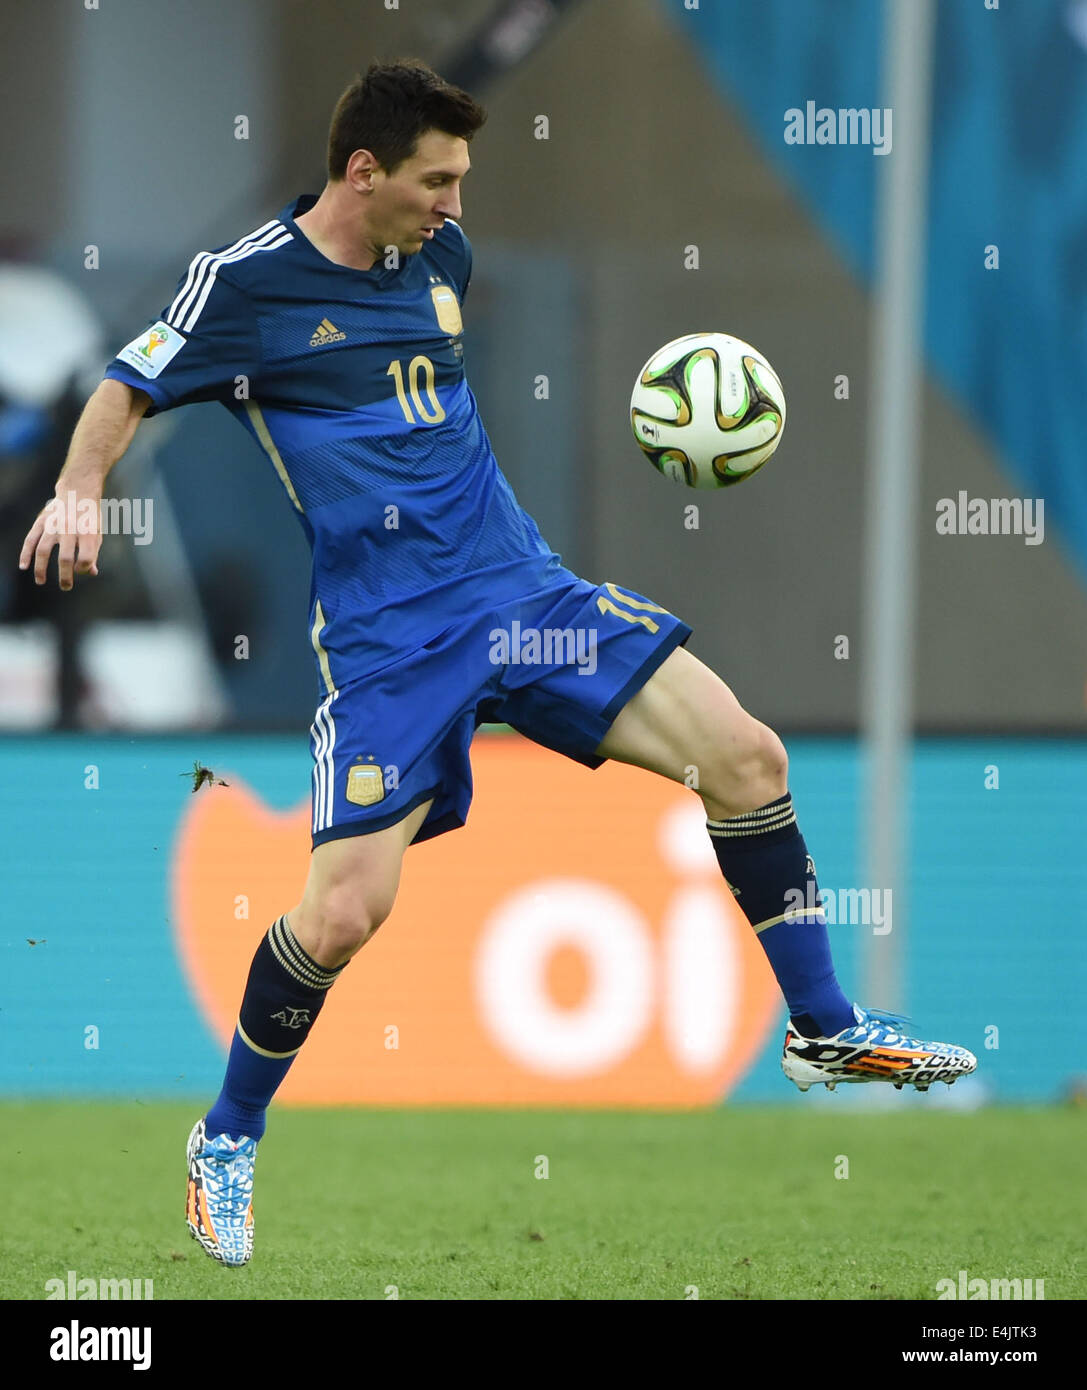 Rio De Janeiro, Brazil. 13th July, 2014. Argentina's Lionel Messi controls the ball during the final match between Germany and Argentina of 2014 FIFA World Cup at the Estadio do Maracana Stadium in Rio de Janeiro, Brazil, on July 13, 2014. Credit:  Guo Yong/Xinhua/Alamy Live News Stock Photo